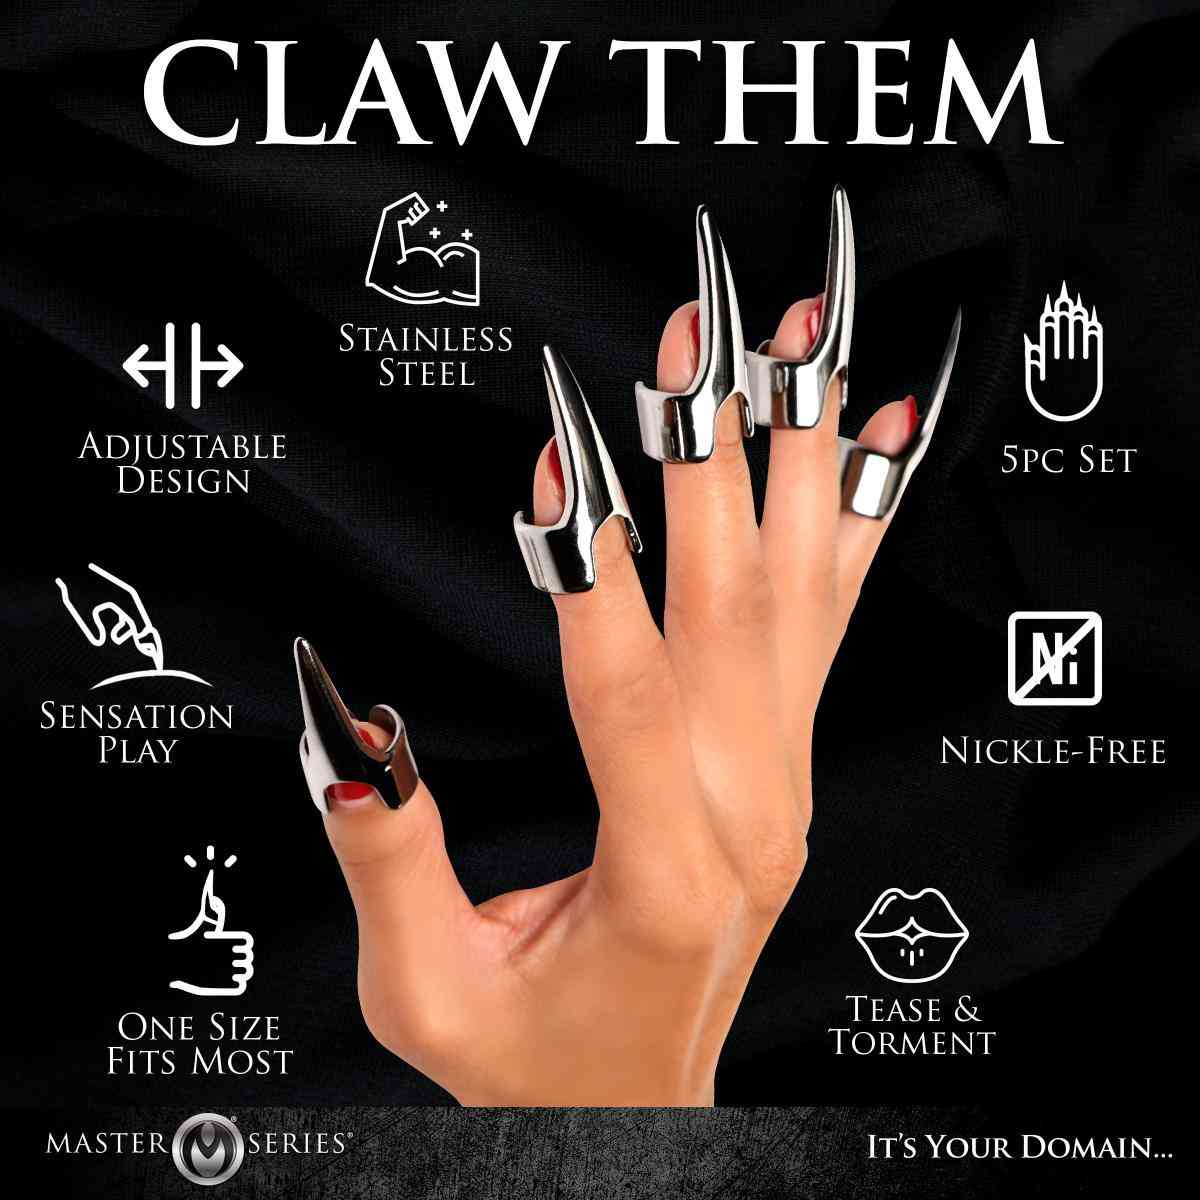 5-teiliges Ringset "Sensation Claw" an Frauenhand